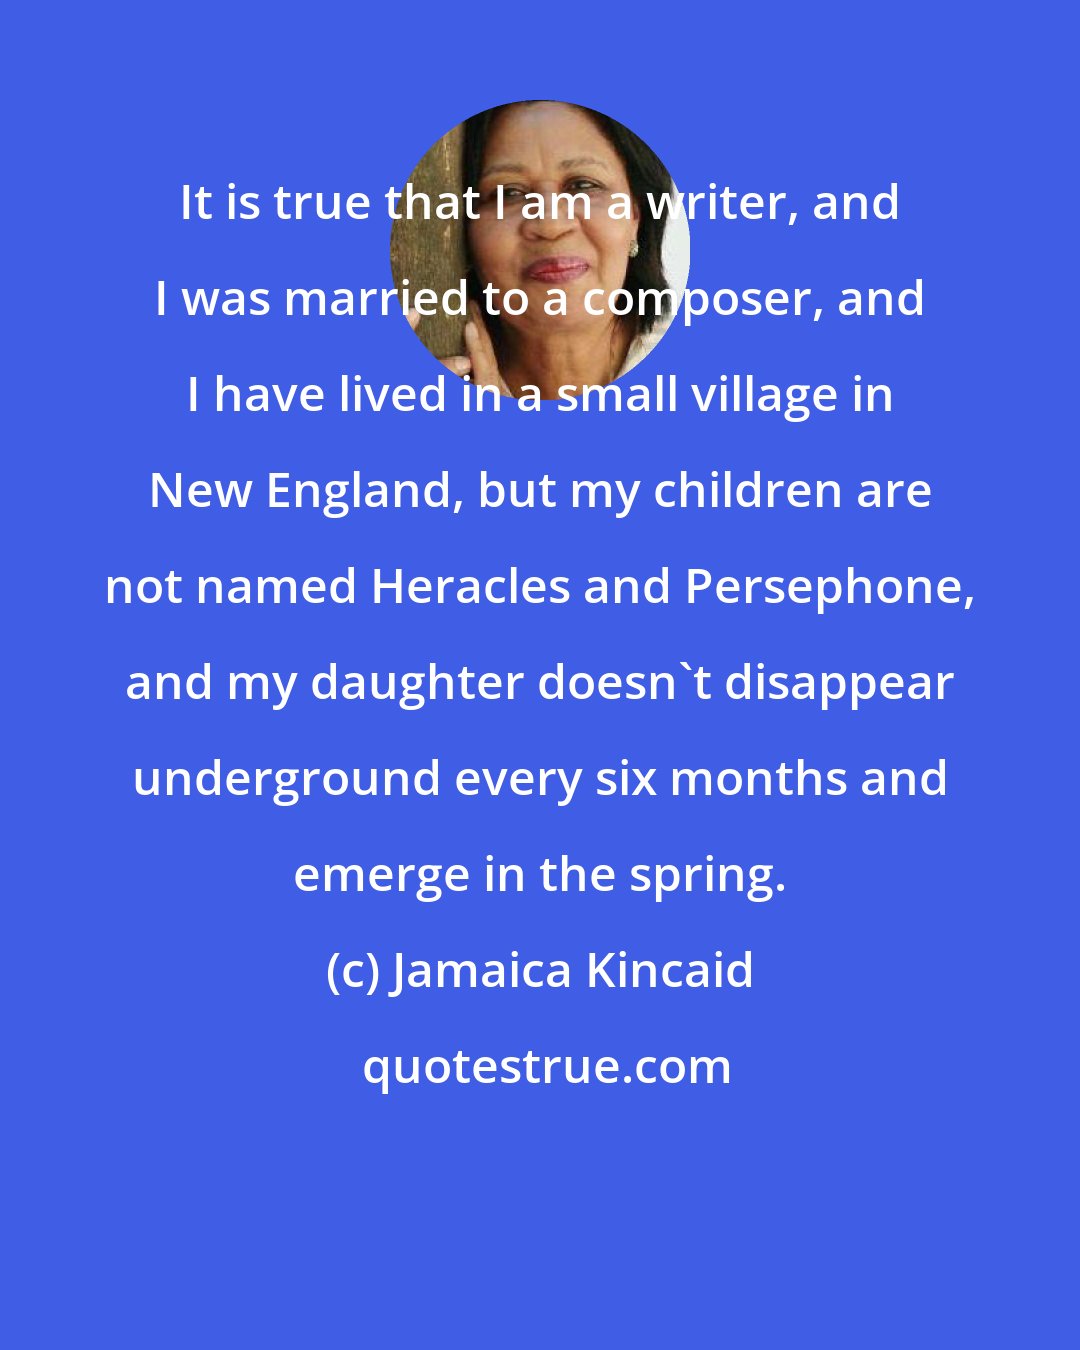 Jamaica Kincaid: It is true that I am a writer, and I was married to a composer, and I have lived in a small village in New England, but my children are not named Heracles and Persephone, and my daughter doesn't disappear underground every six months and emerge in the spring.